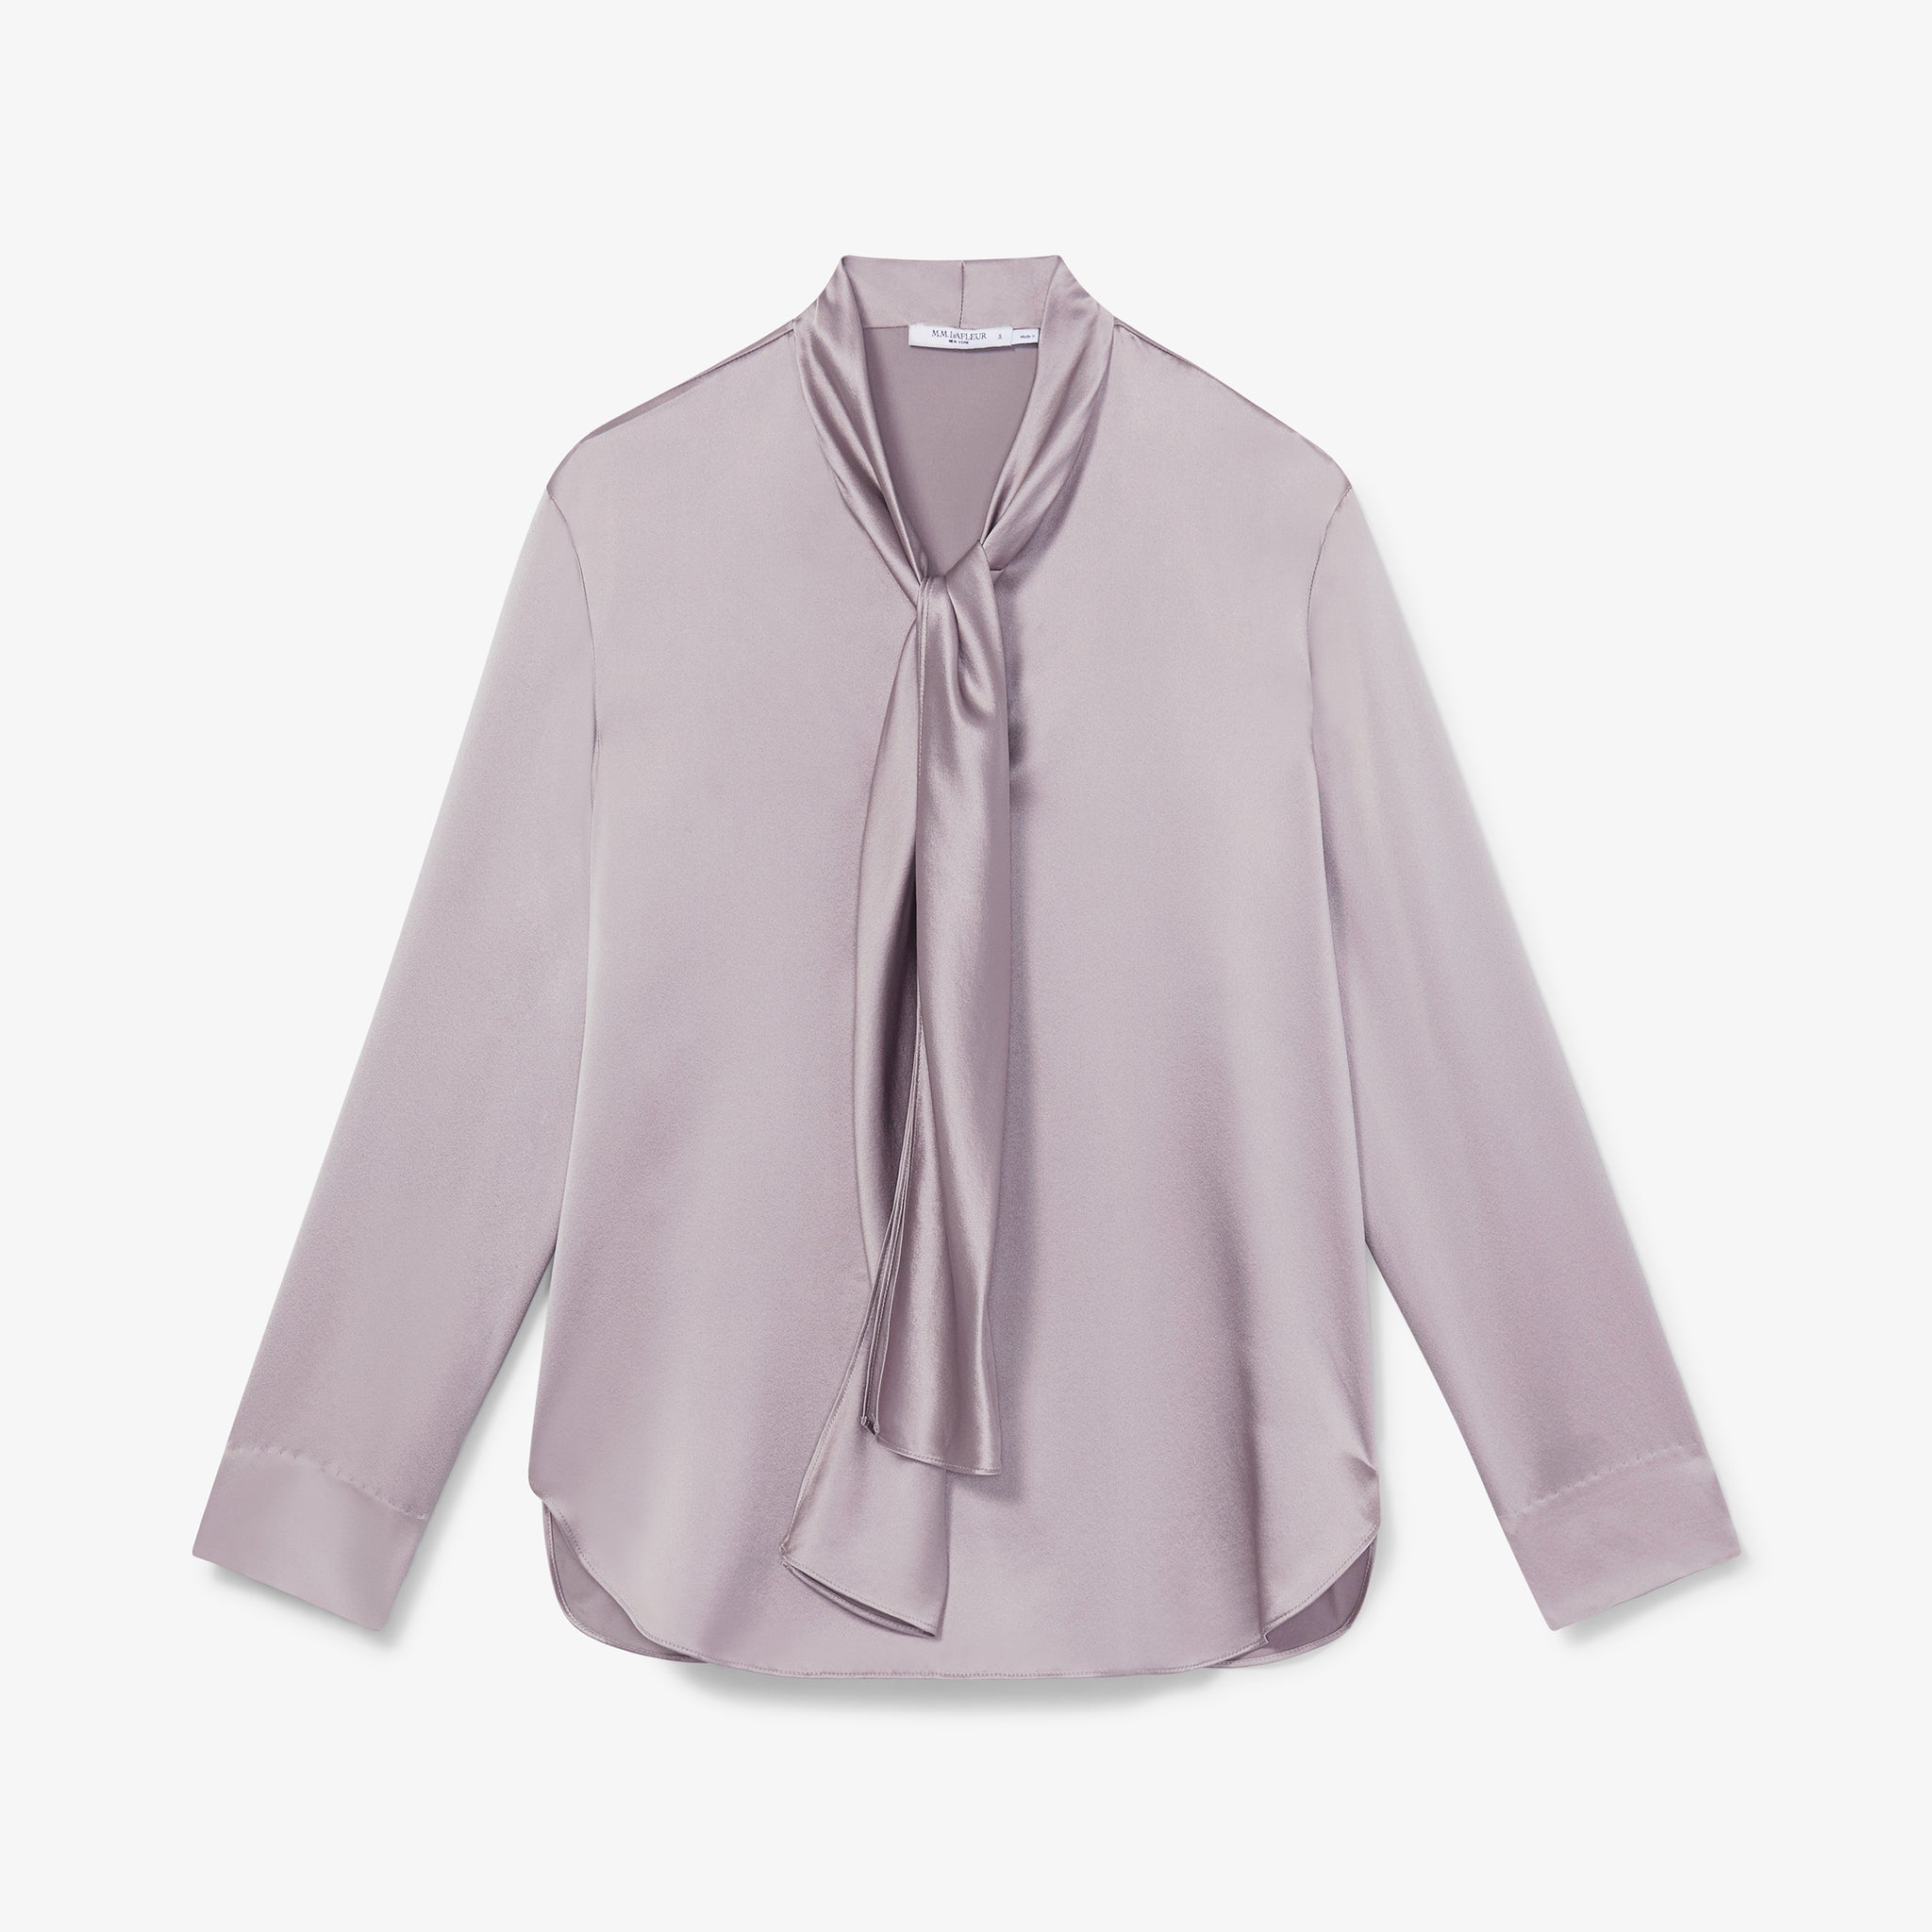 Packshot image of the Darcy Top - Washable Silk Charmeuse in Wisteria